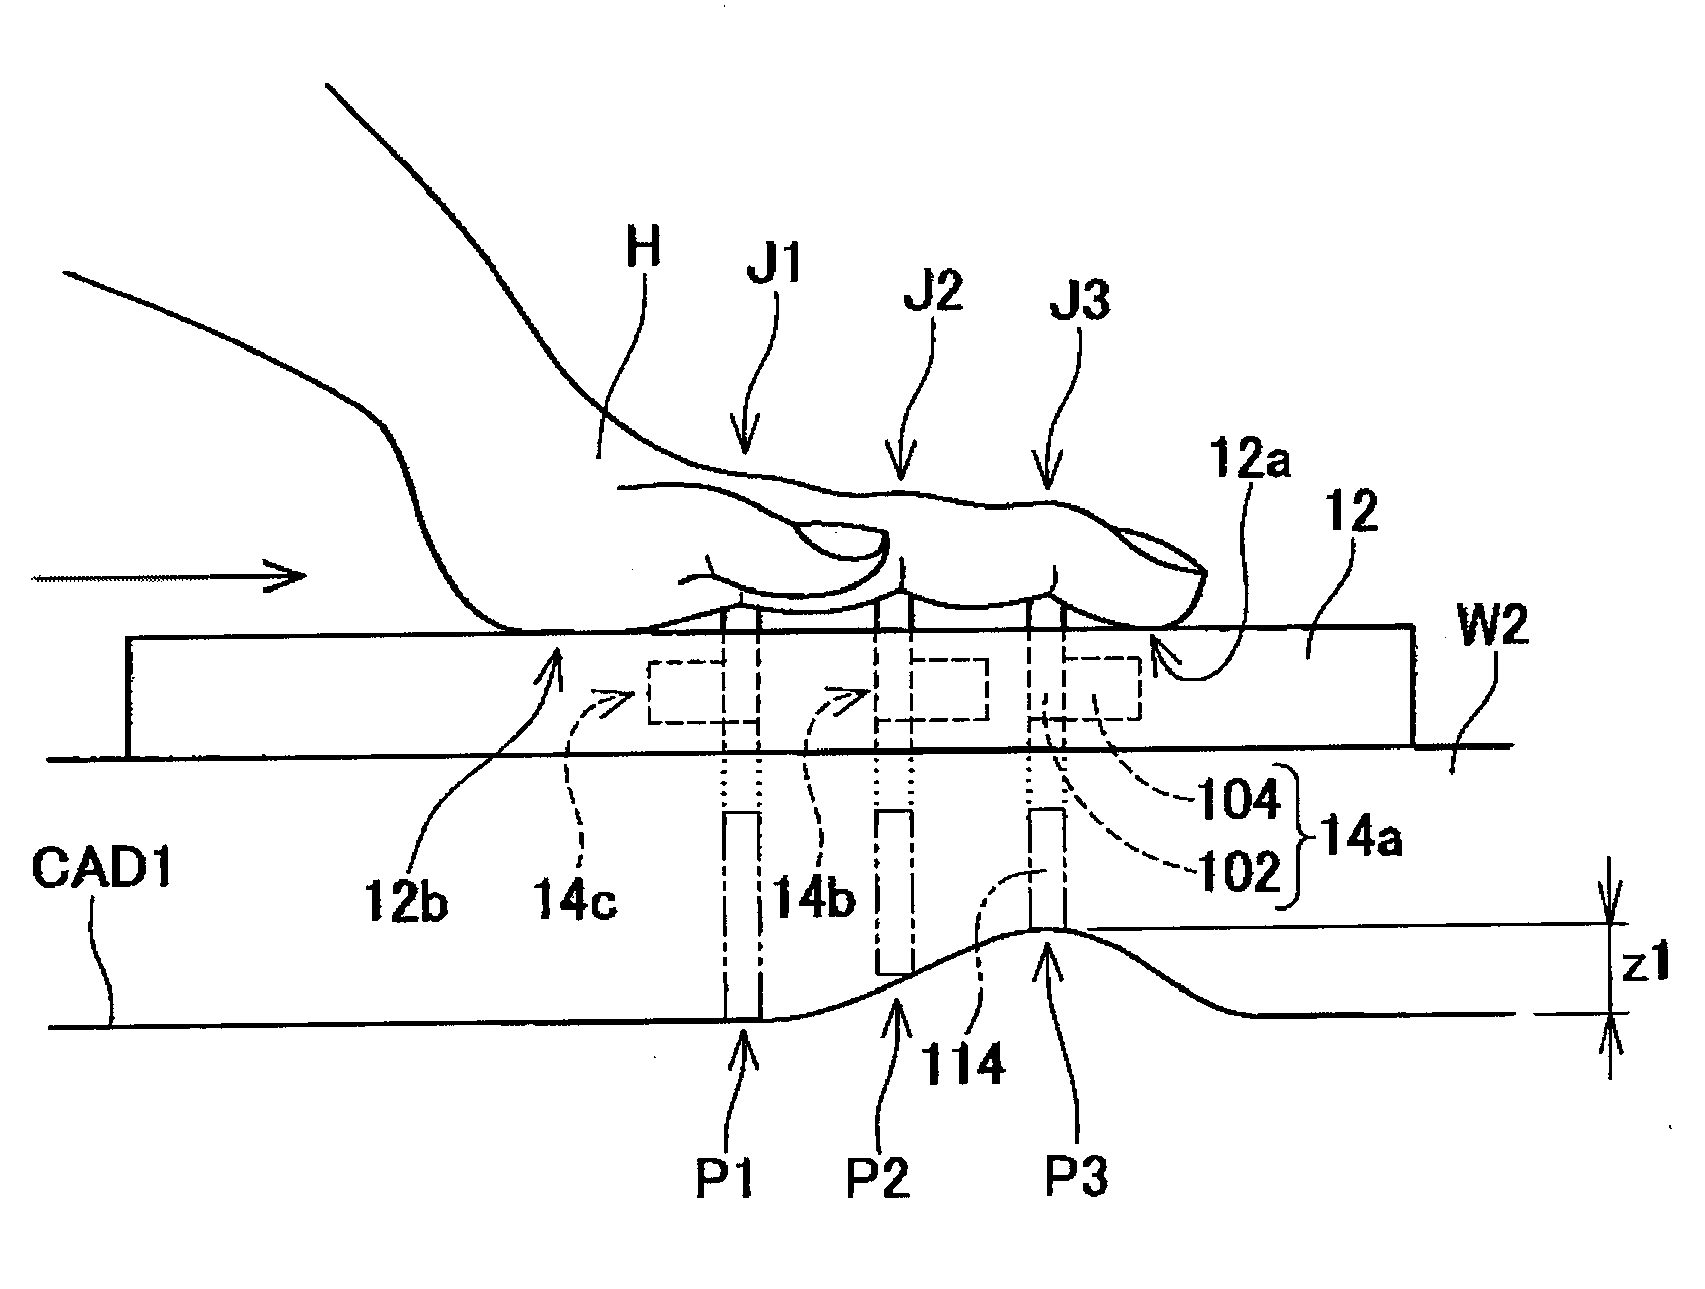 Tactile display and cad system